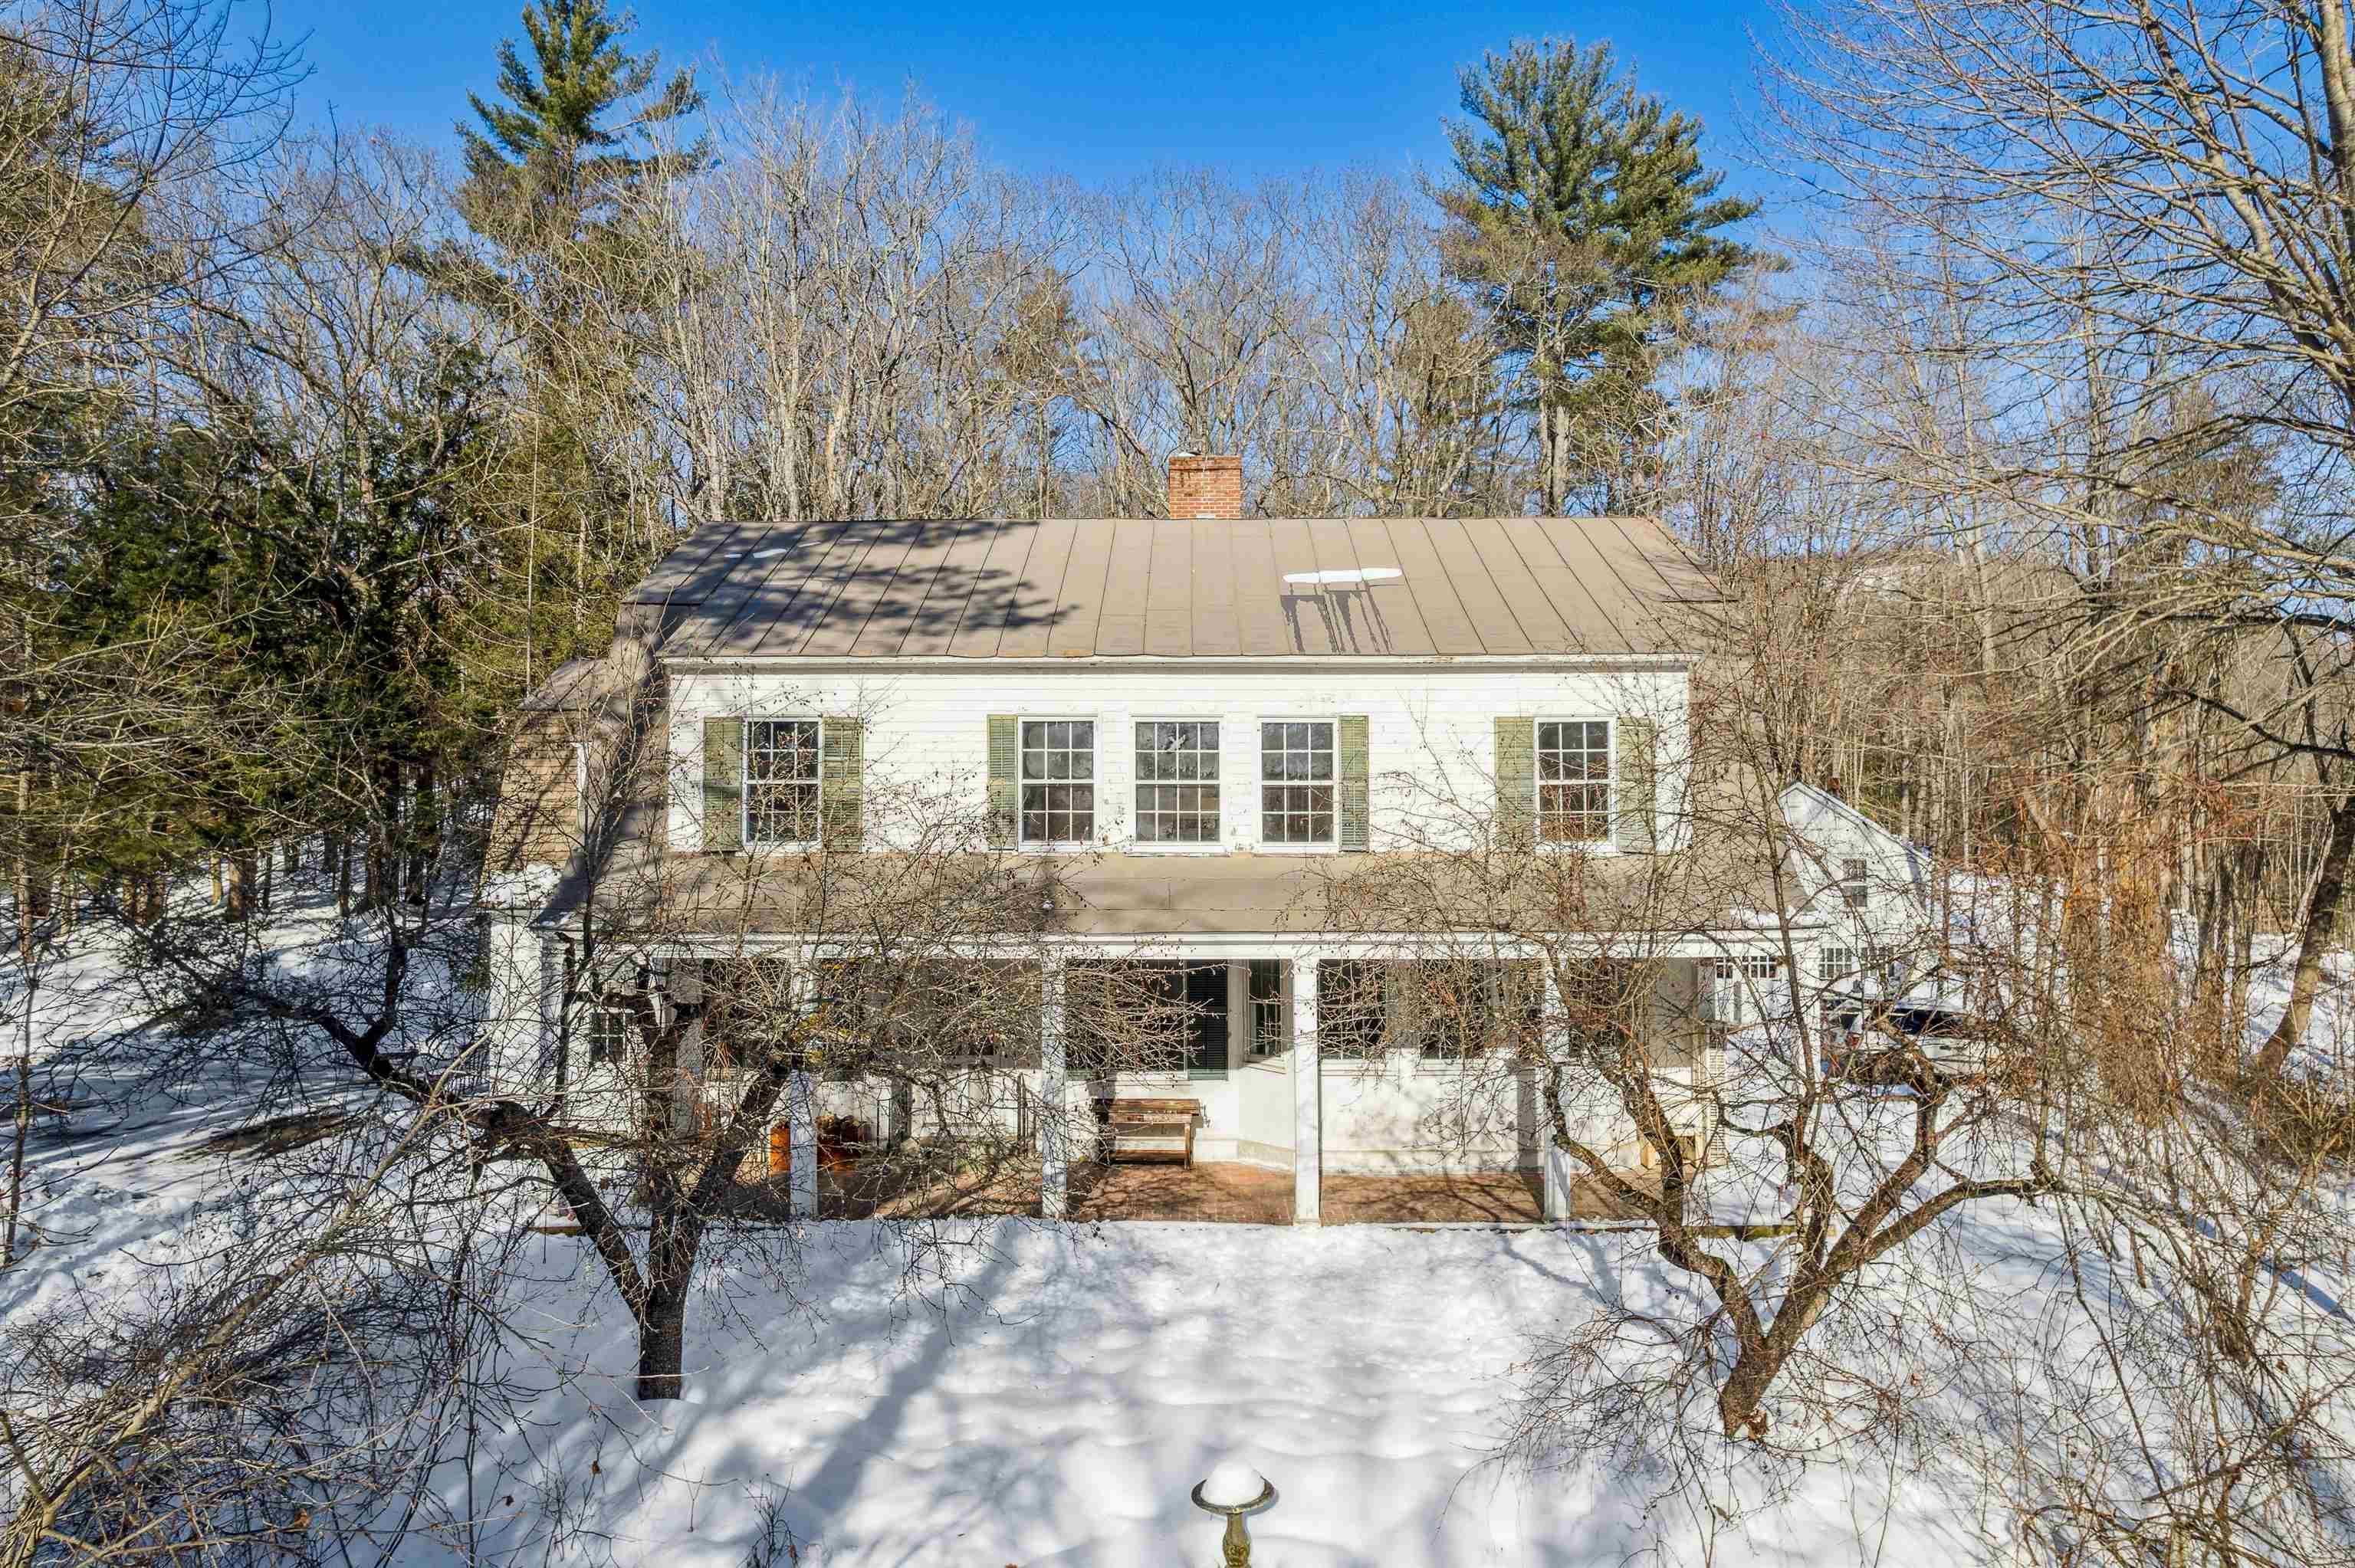 72 Frenchs Road, Woodstock, VT 